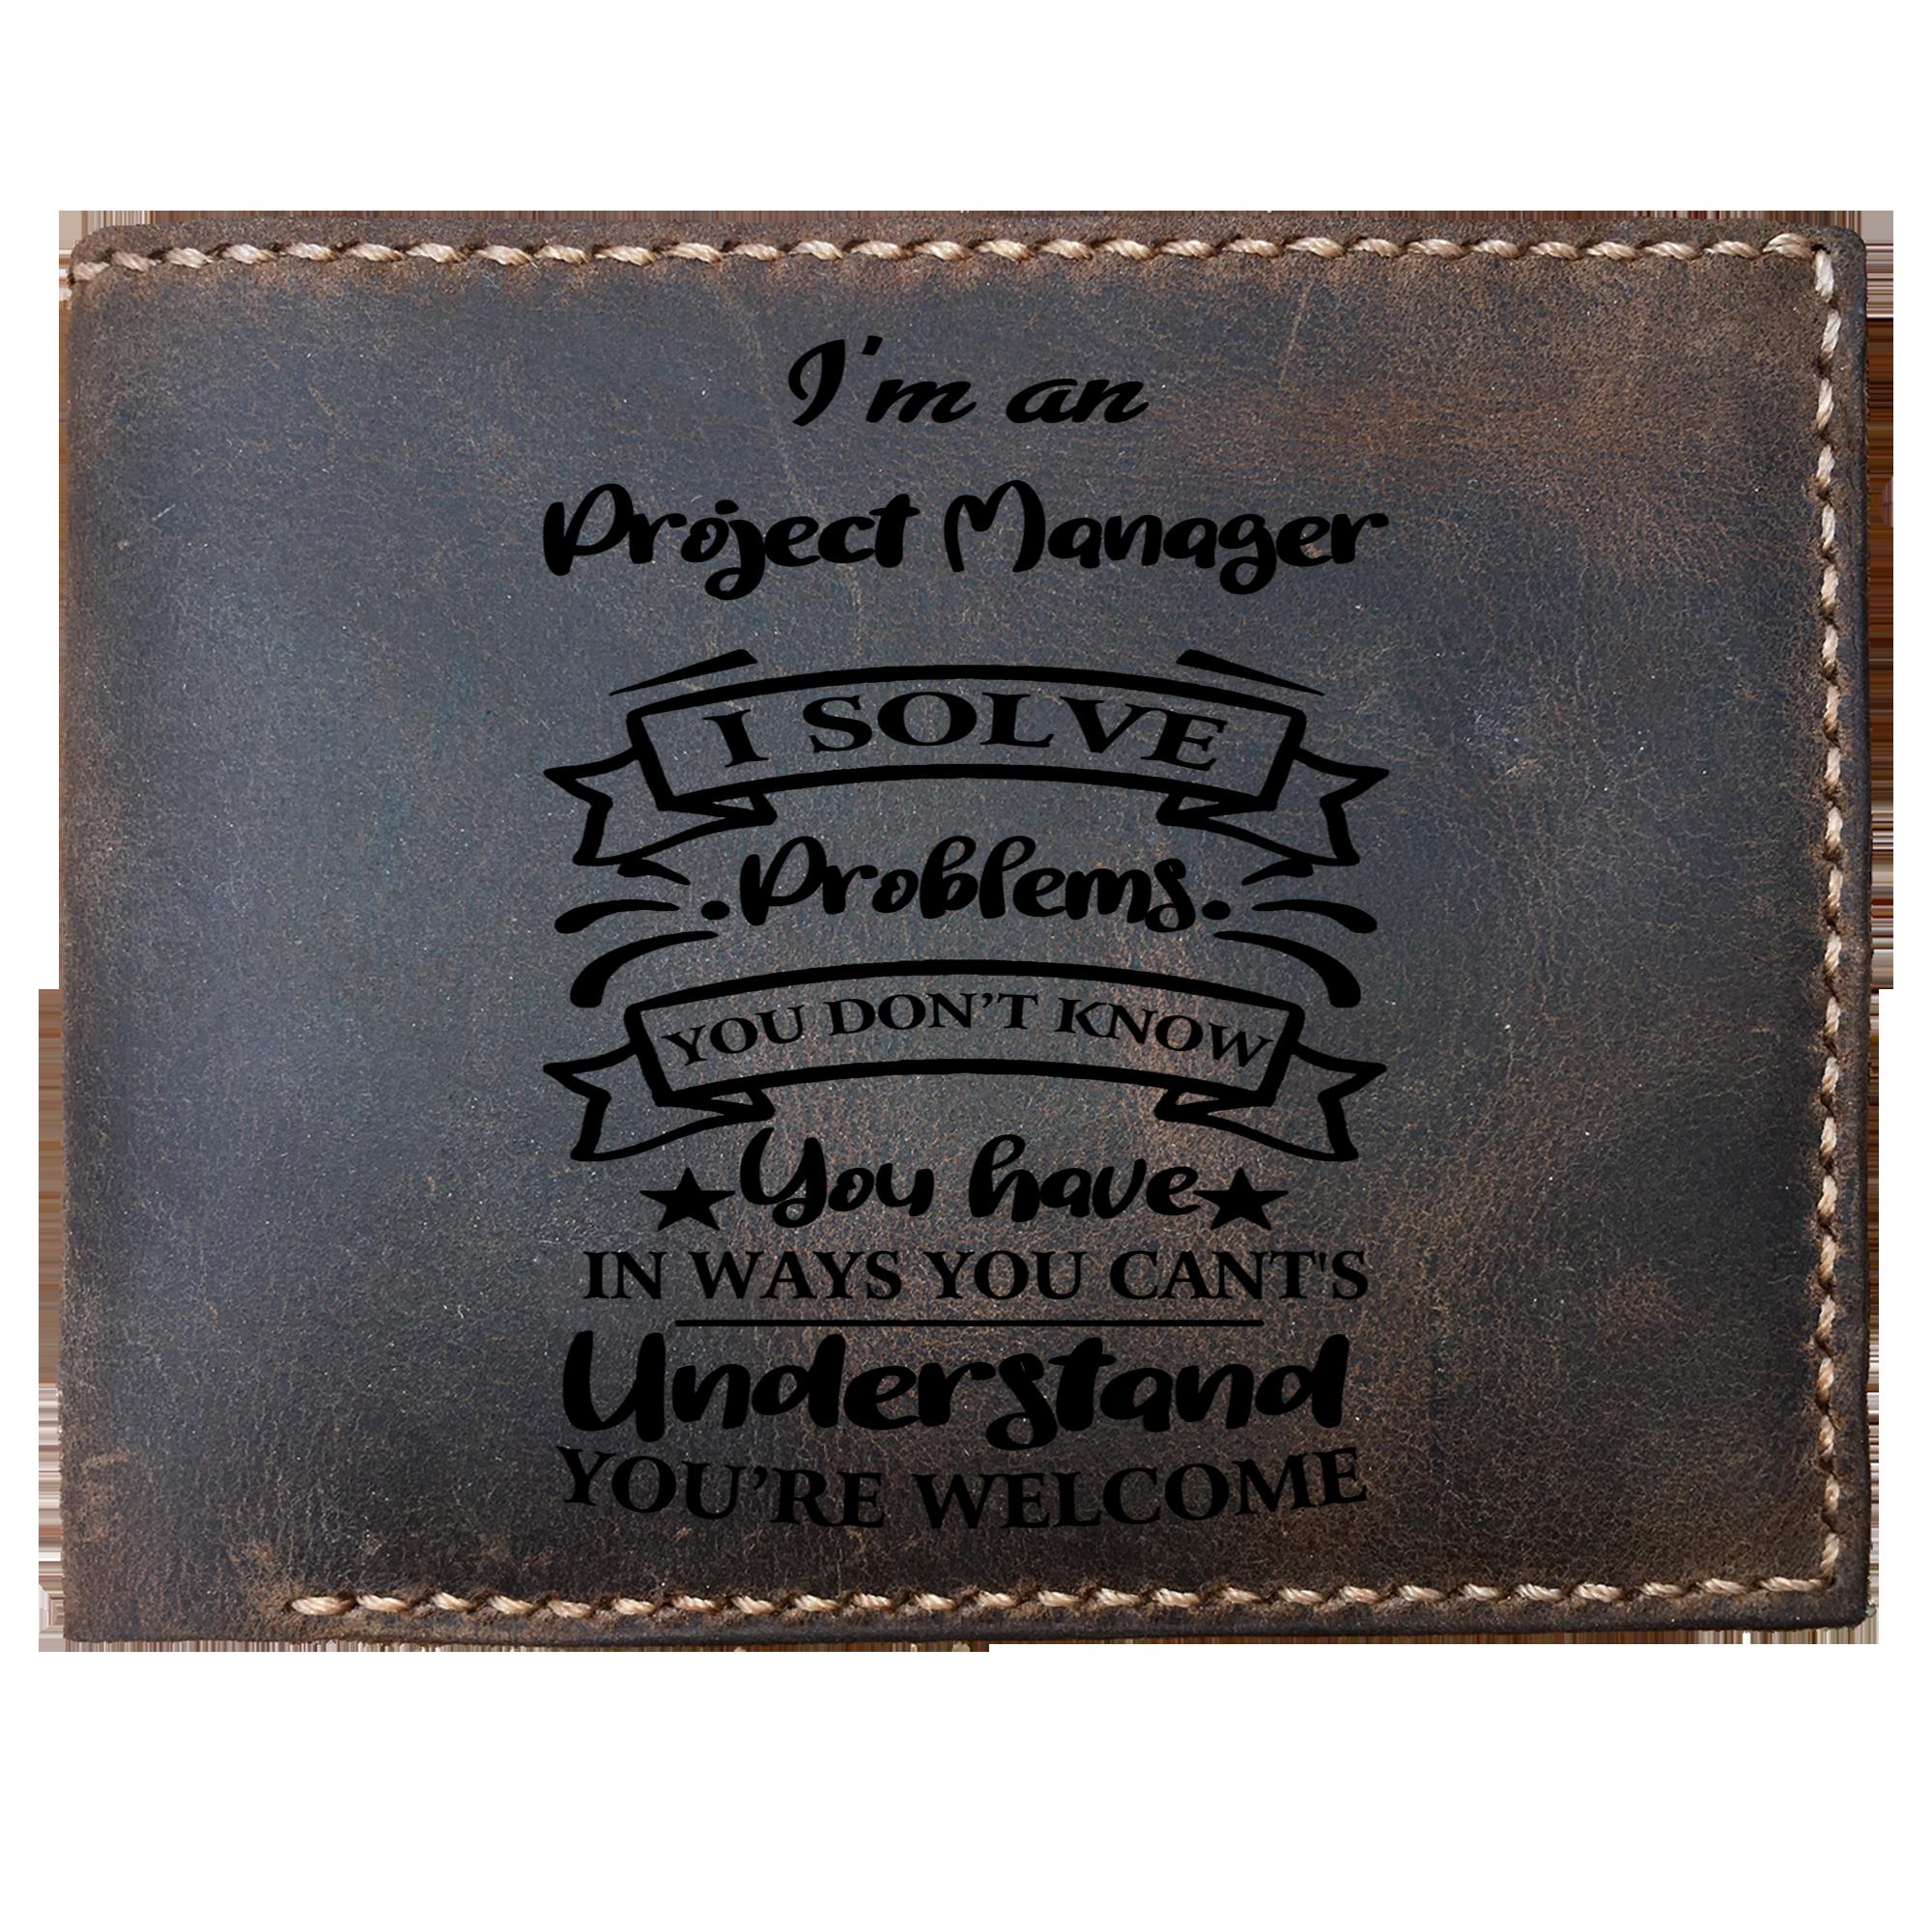 Skitongifts Funny Custom Laser Engraved Bifold Leather Wallet For Men, I'm an Project Manager Solve Problems, Father's Day Gifts